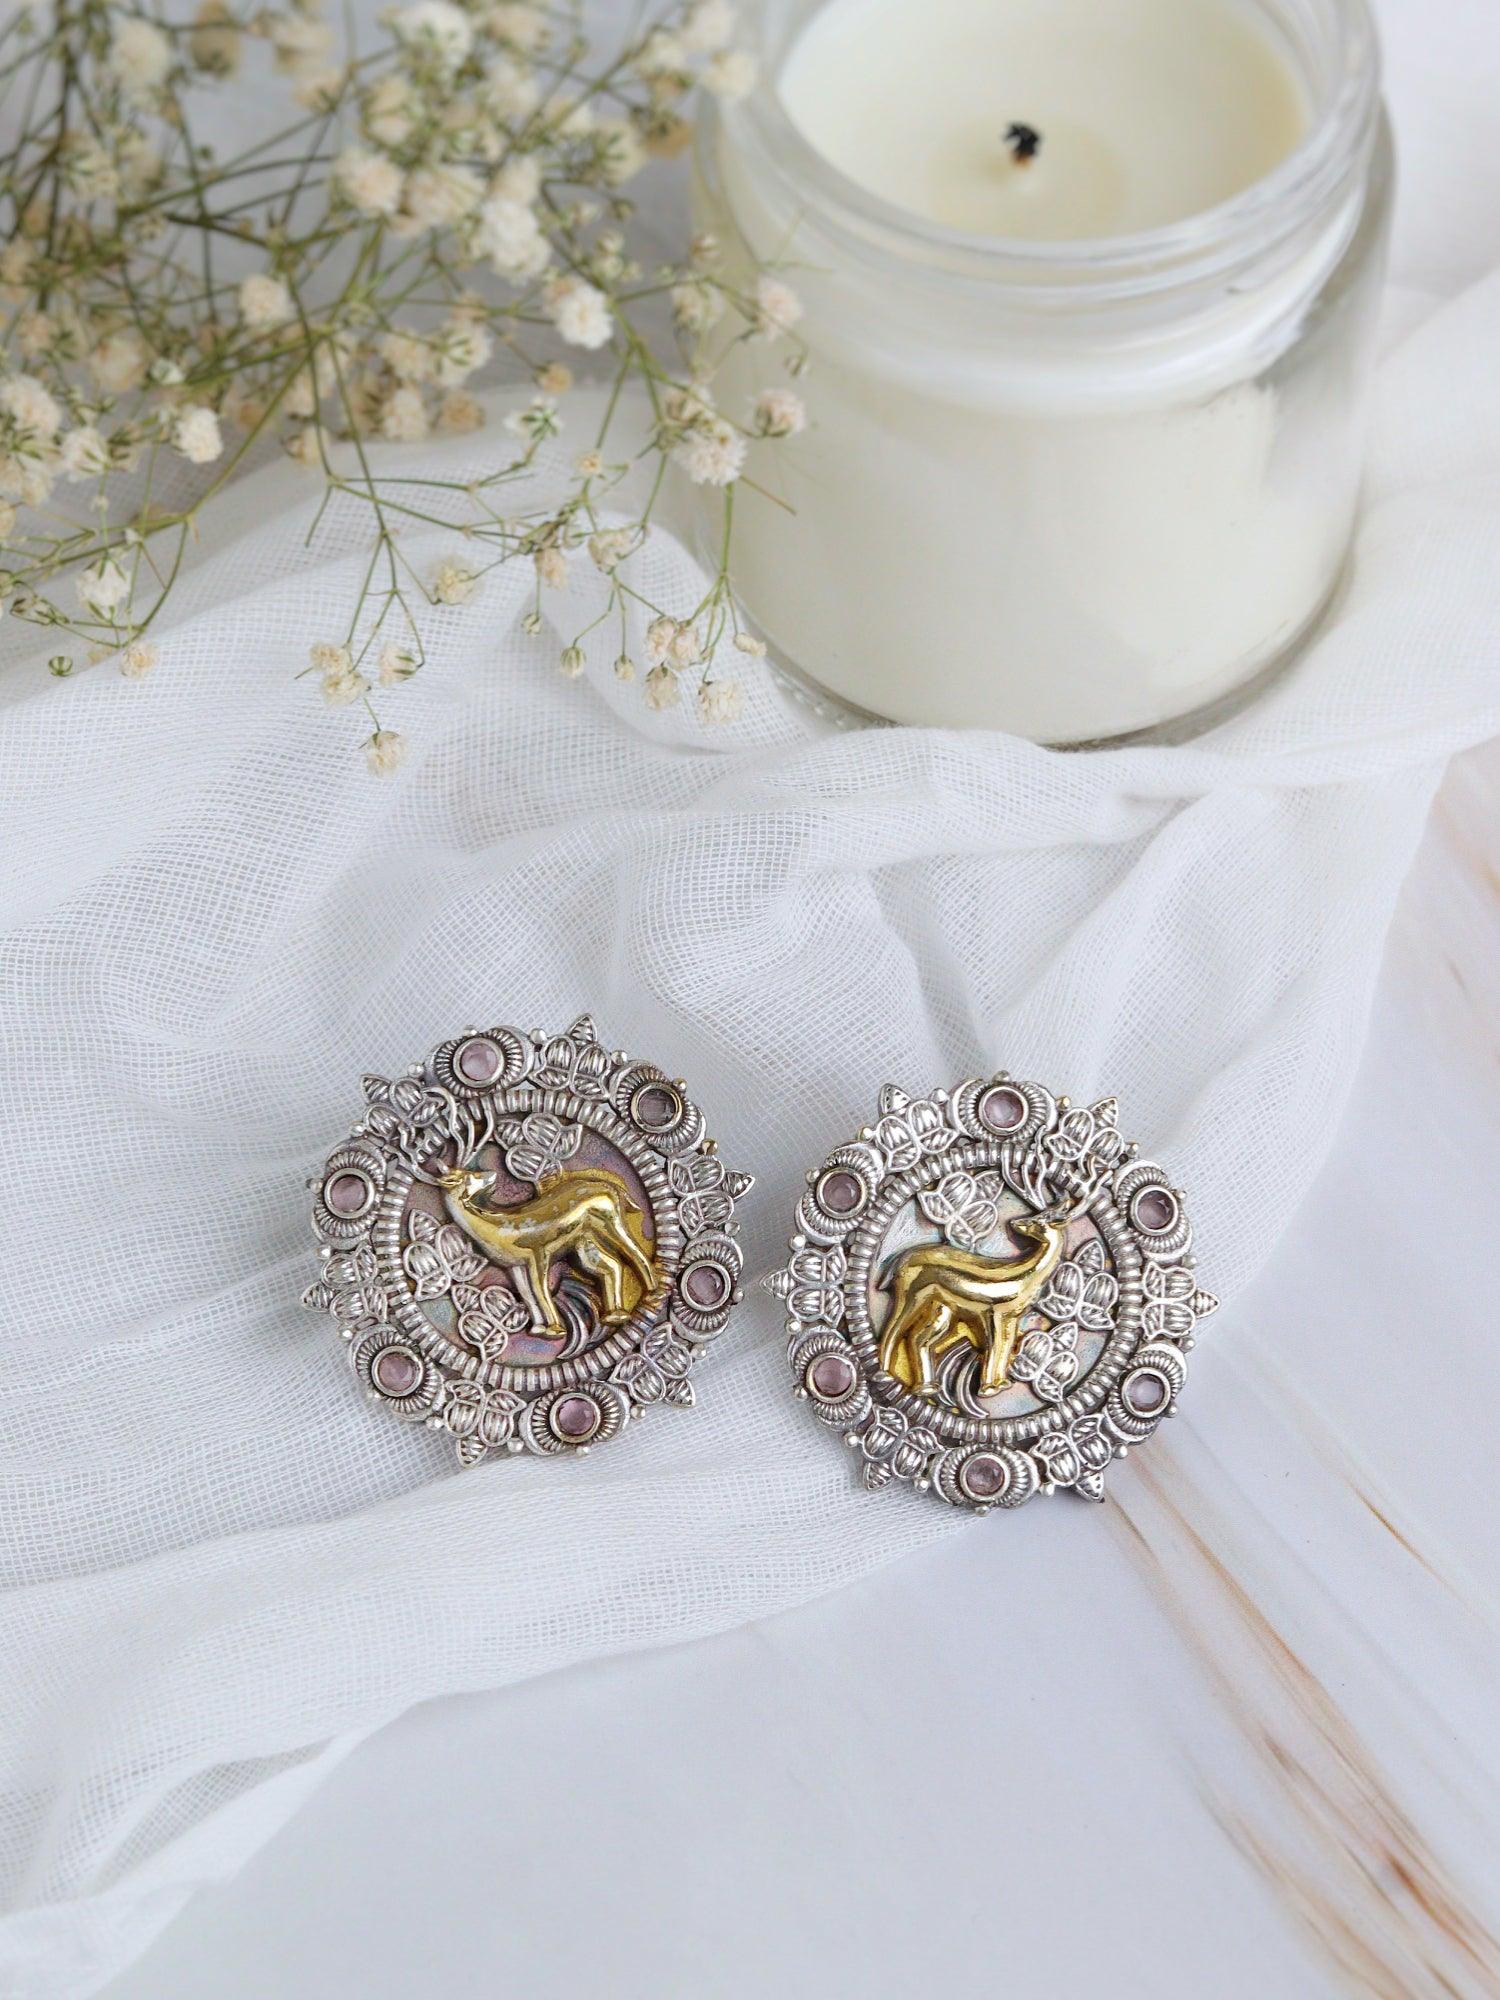 The Gypsy Antler Stud Earrings - Curio Cottage 